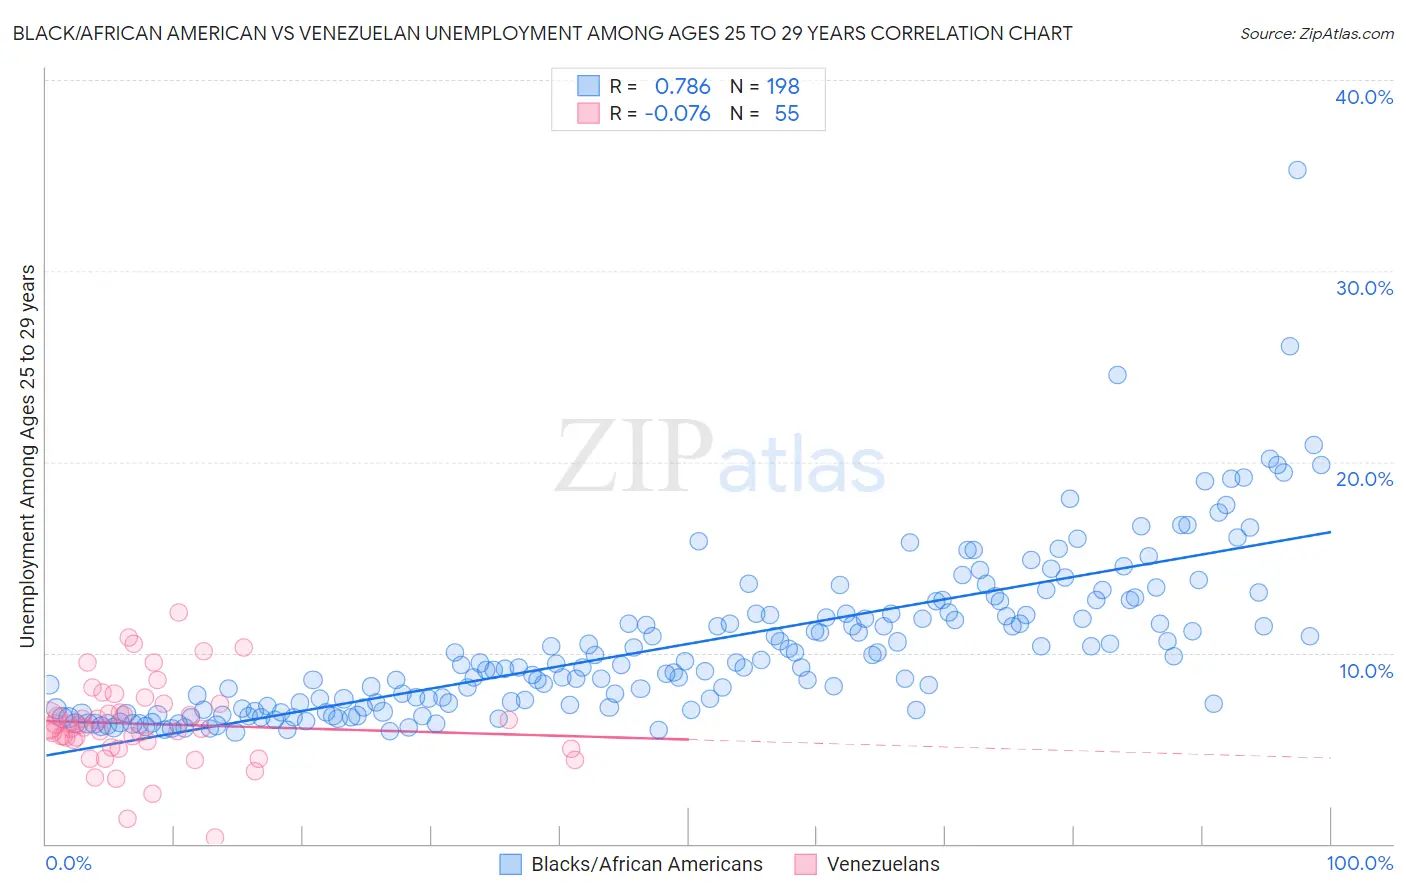 Black/African American vs Venezuelan Unemployment Among Ages 25 to 29 years